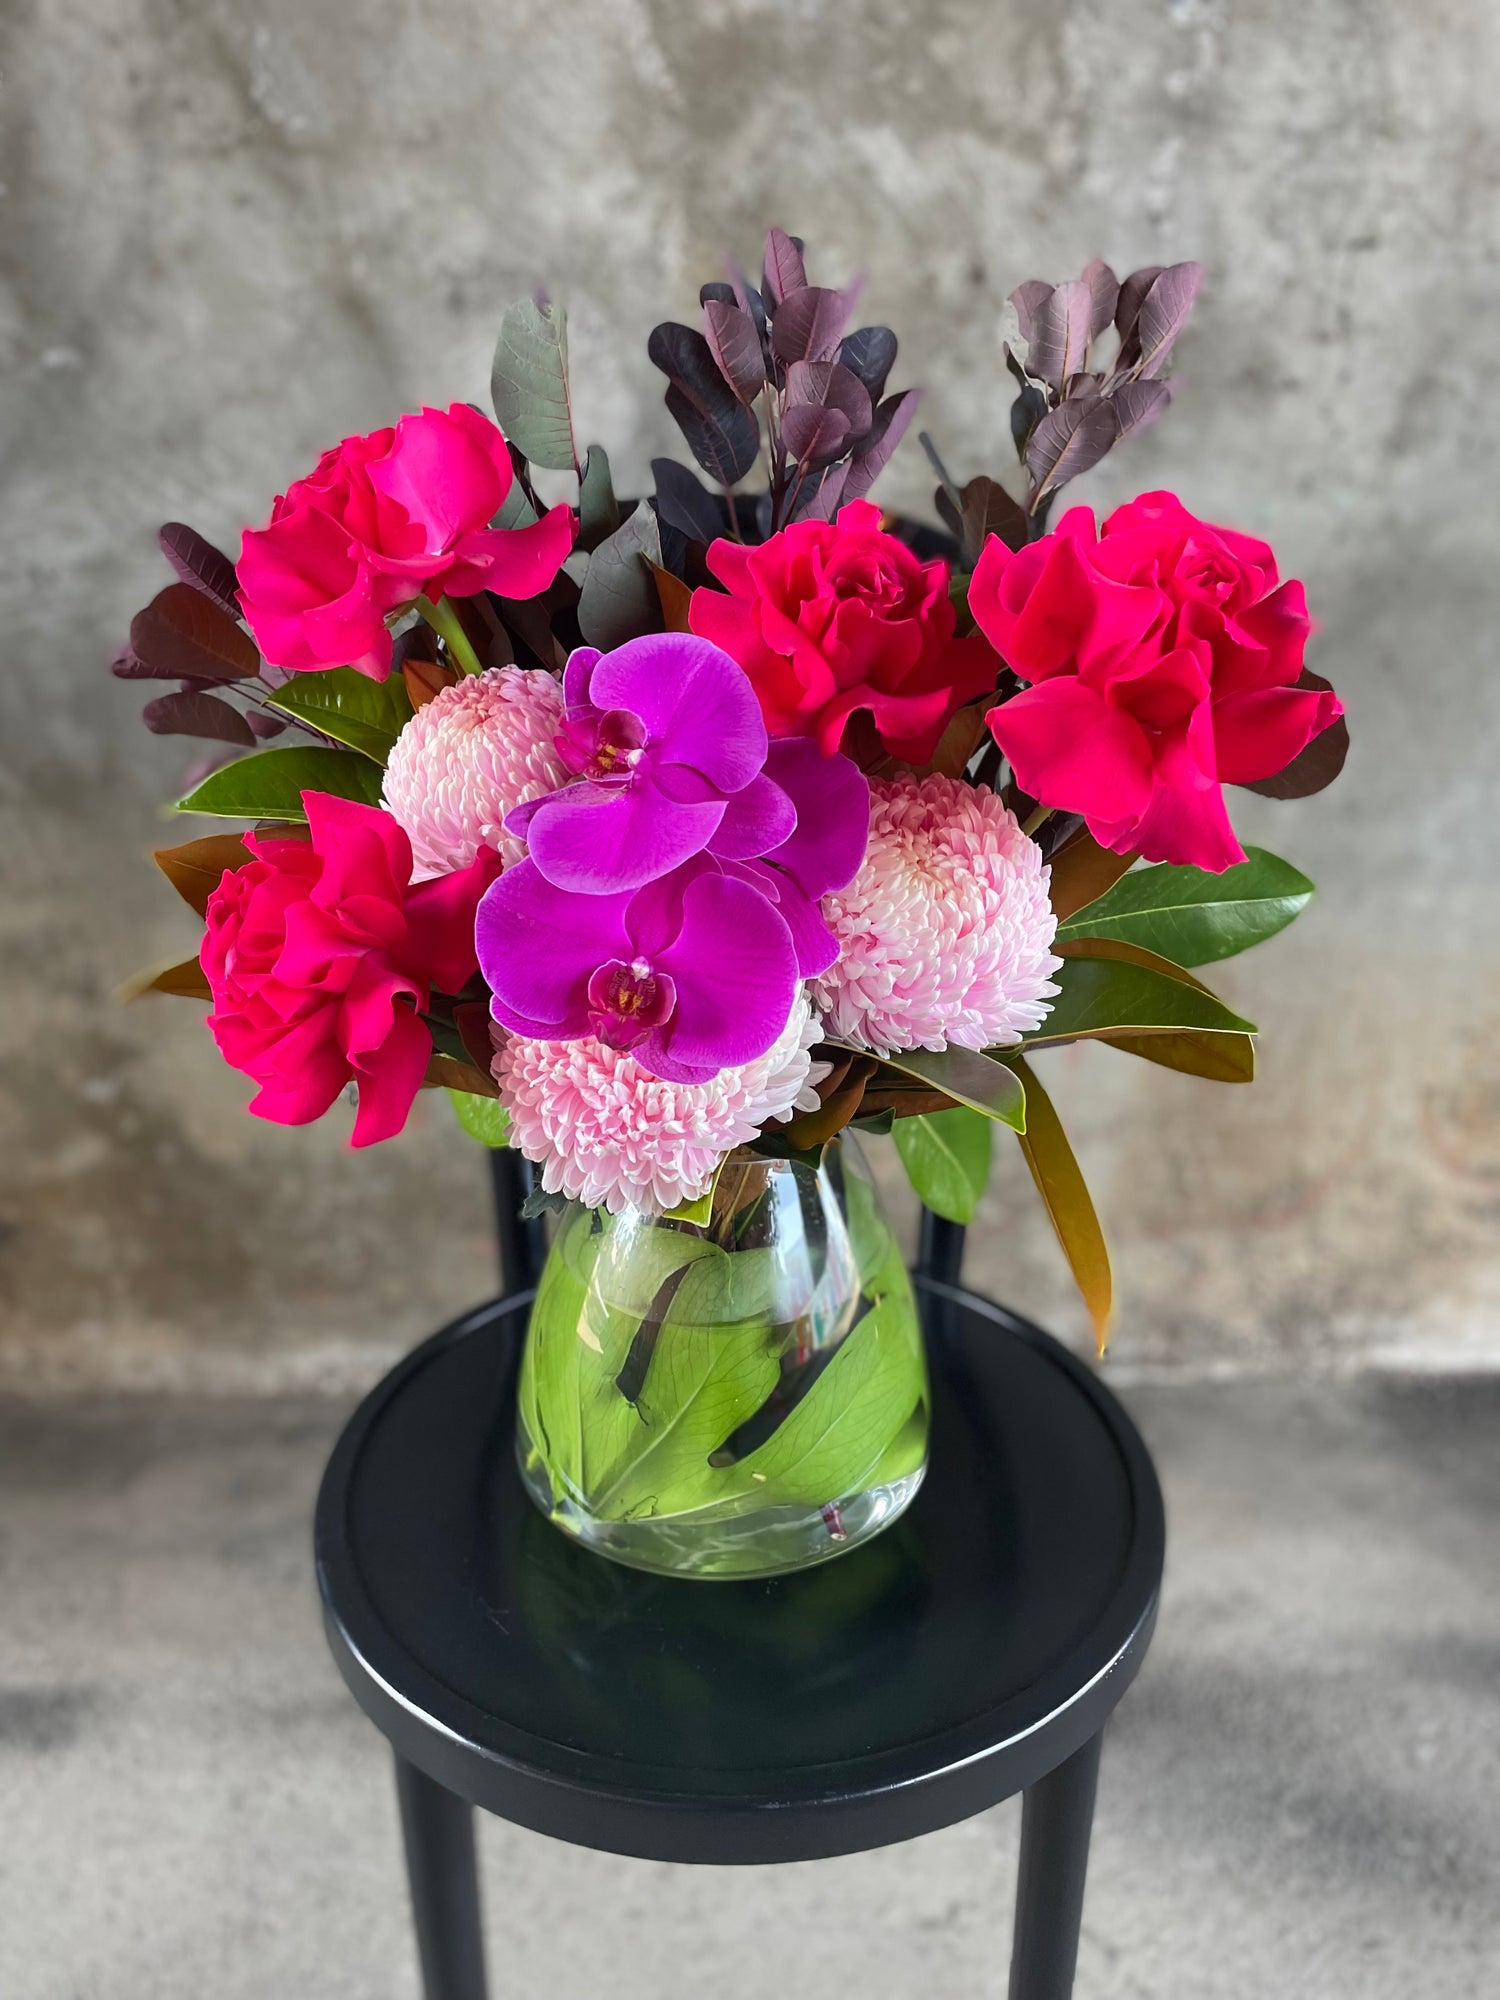 Hot pink, blush, magenta flowers and seasonal foliage displayed in a leaf lined tapered vase, sitting on a black bentwood chair with a concrete wall background.